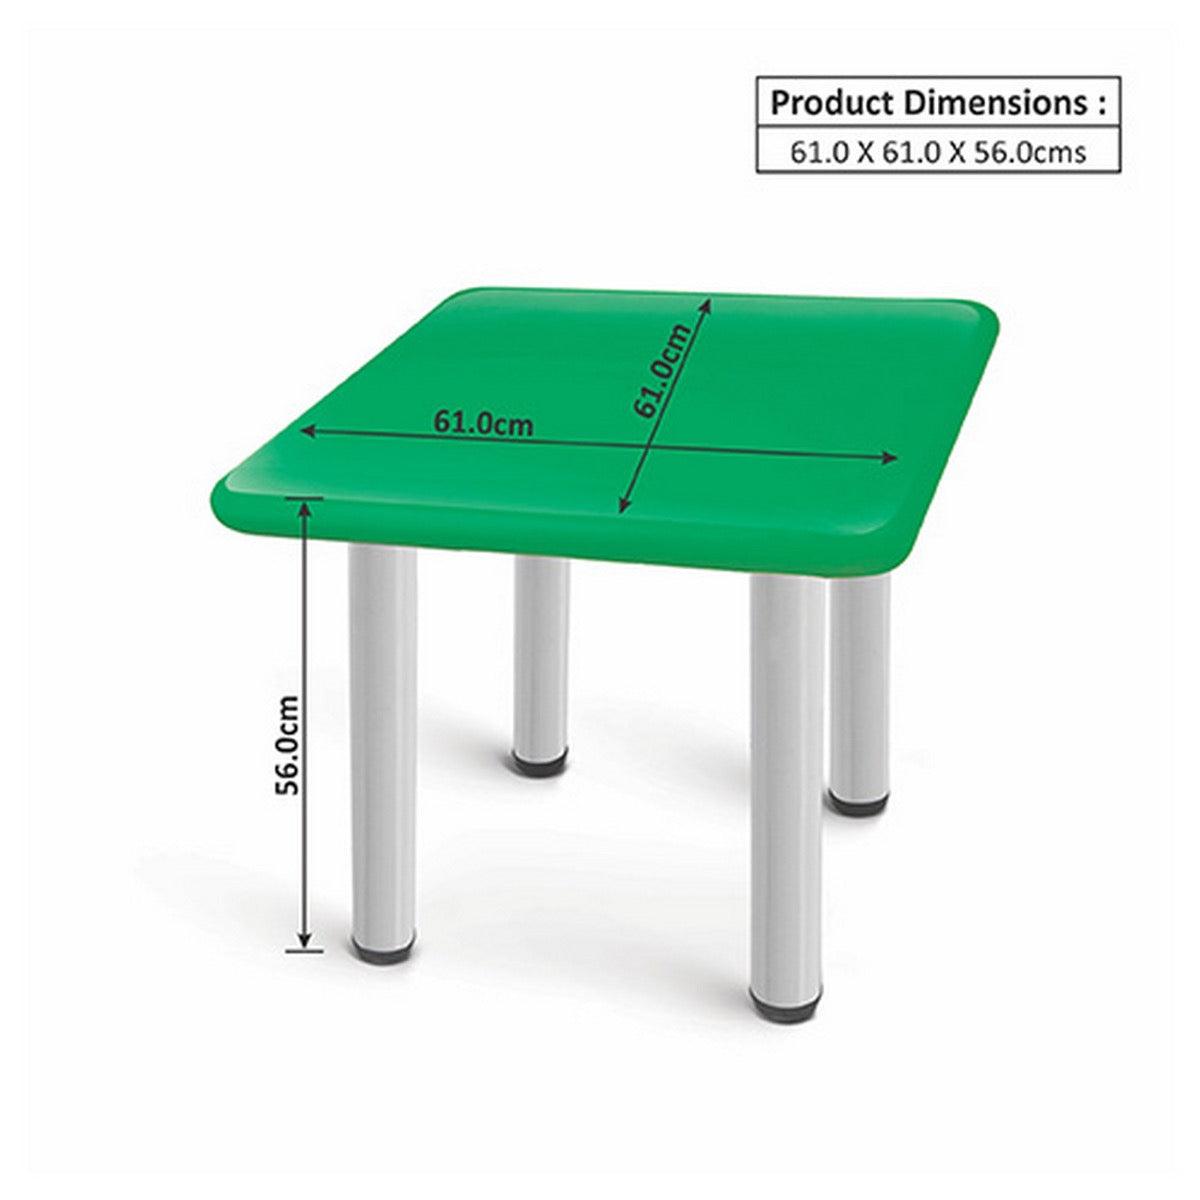 Ok Play Square Table, Smooth & Rounded Edges For Safety, Perfect For Home And School, Green, 2 to 4 Years